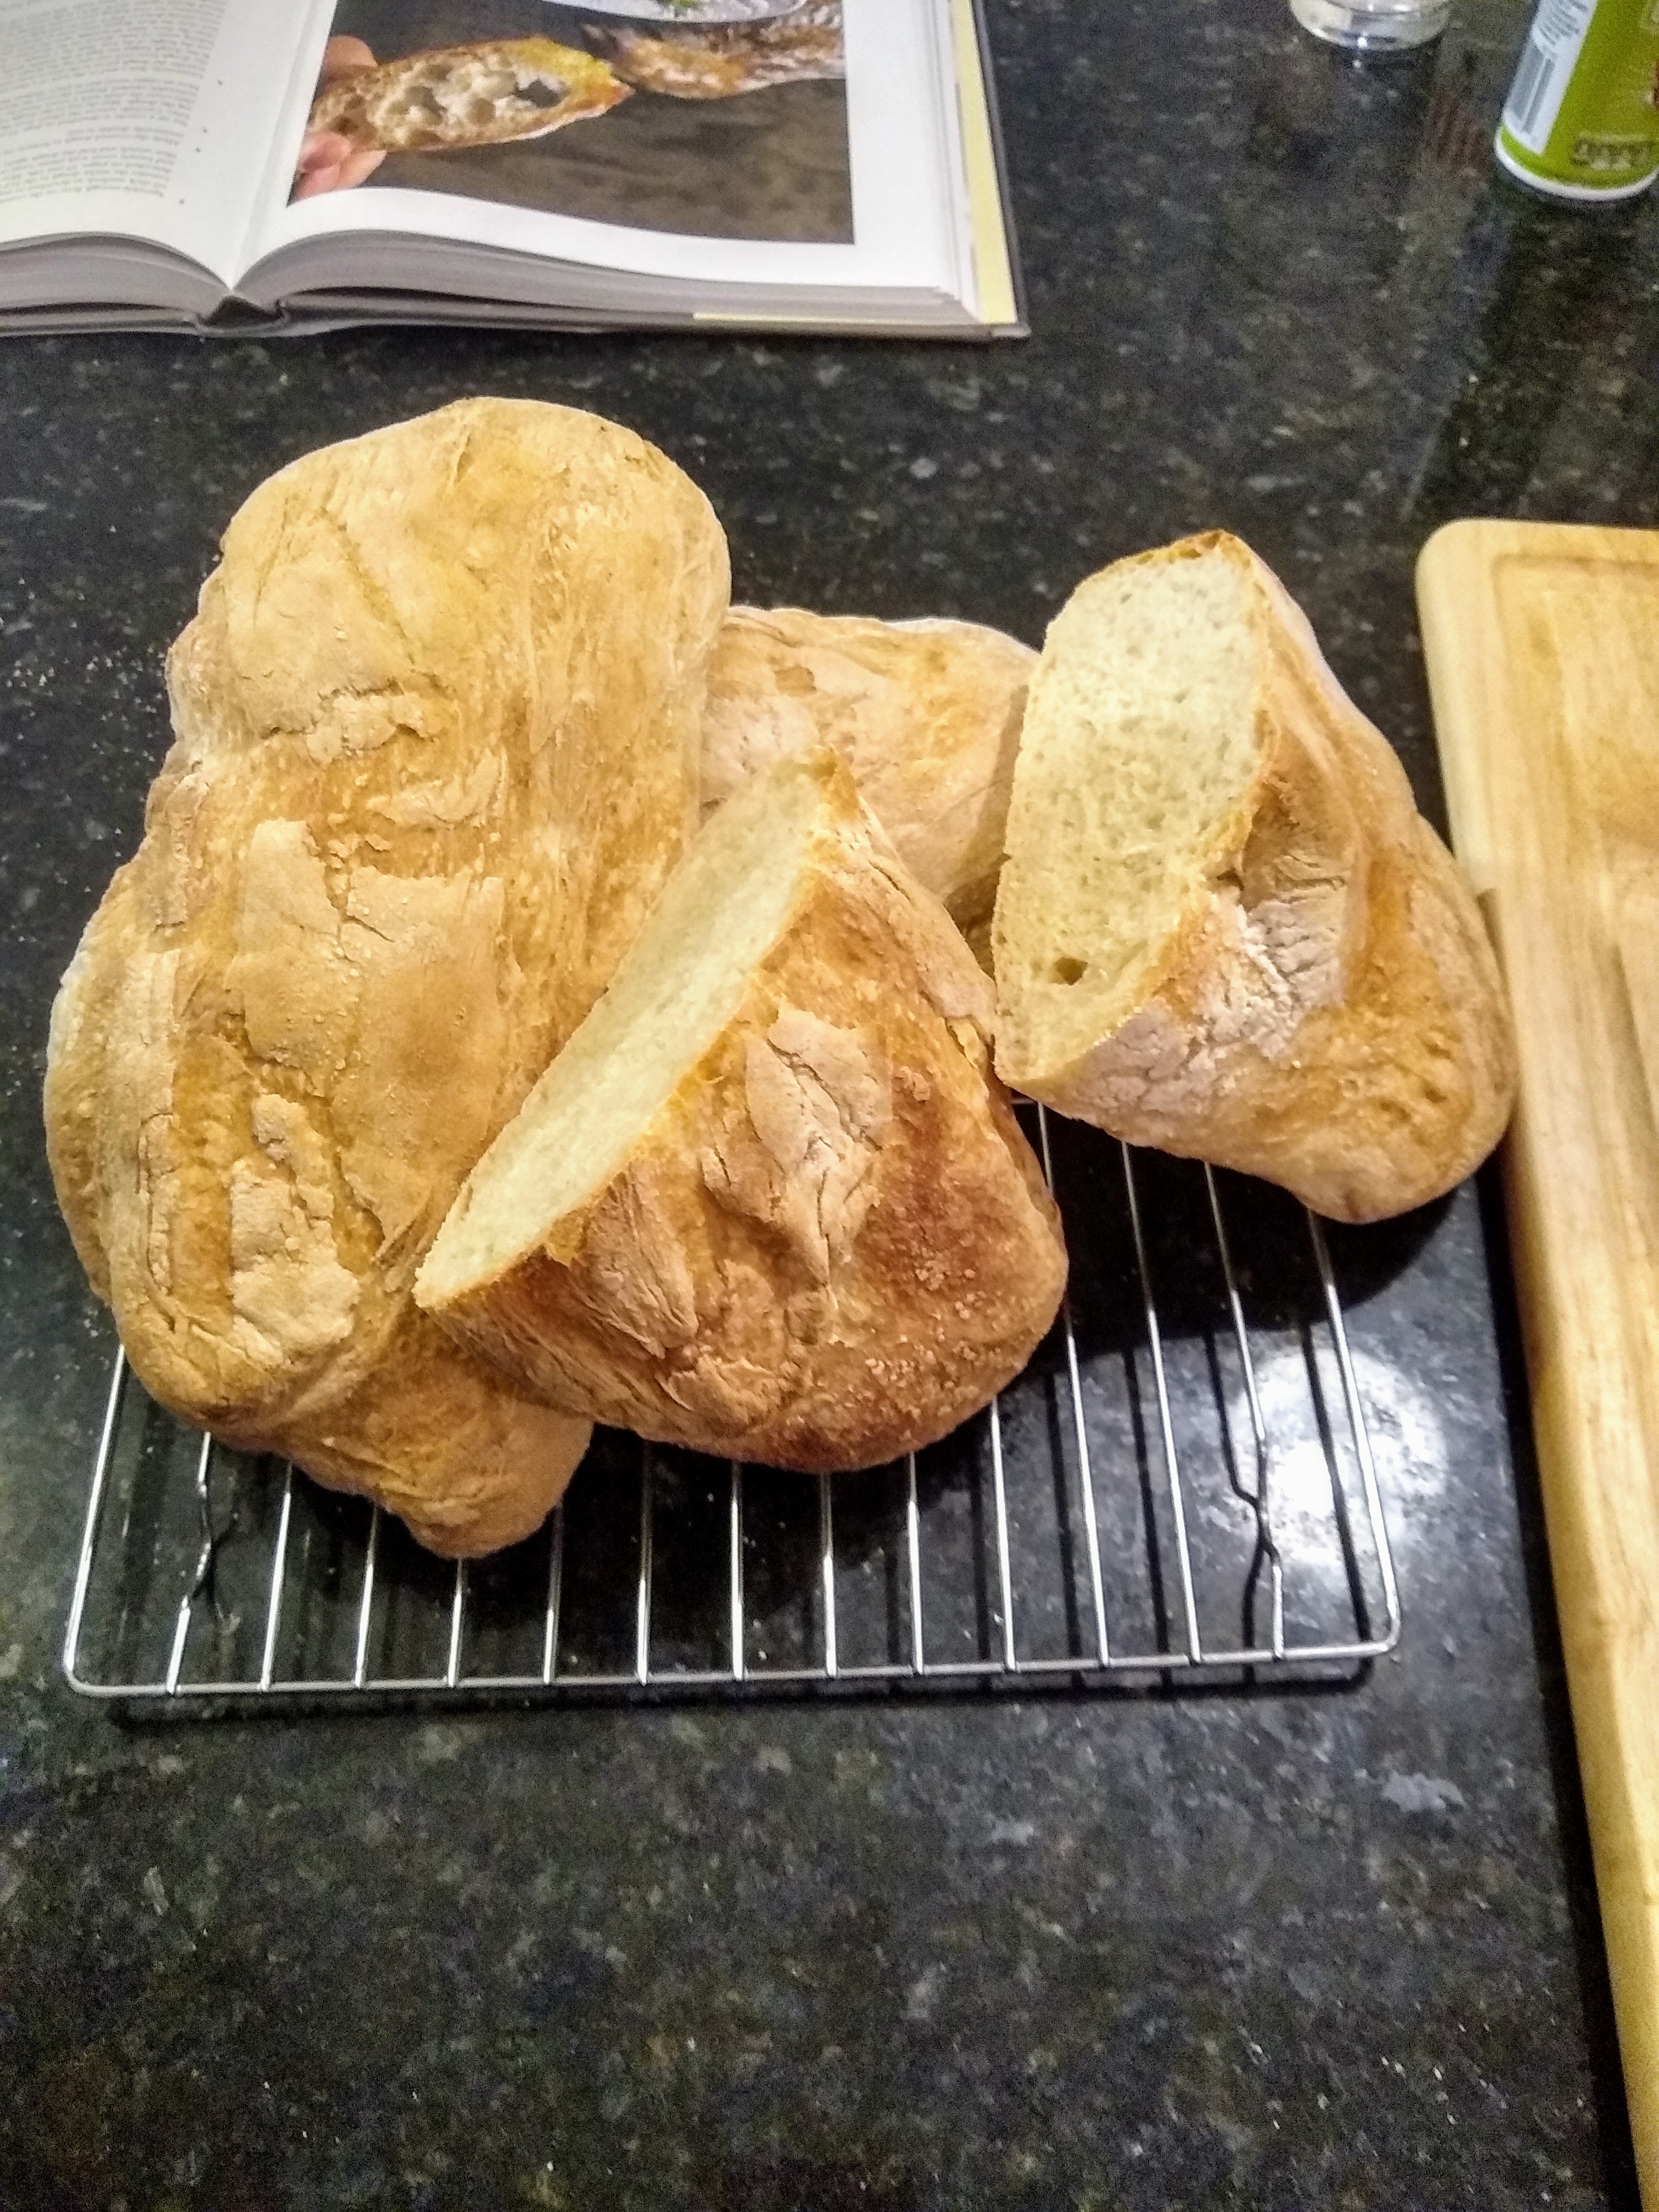 Completed ciabatta